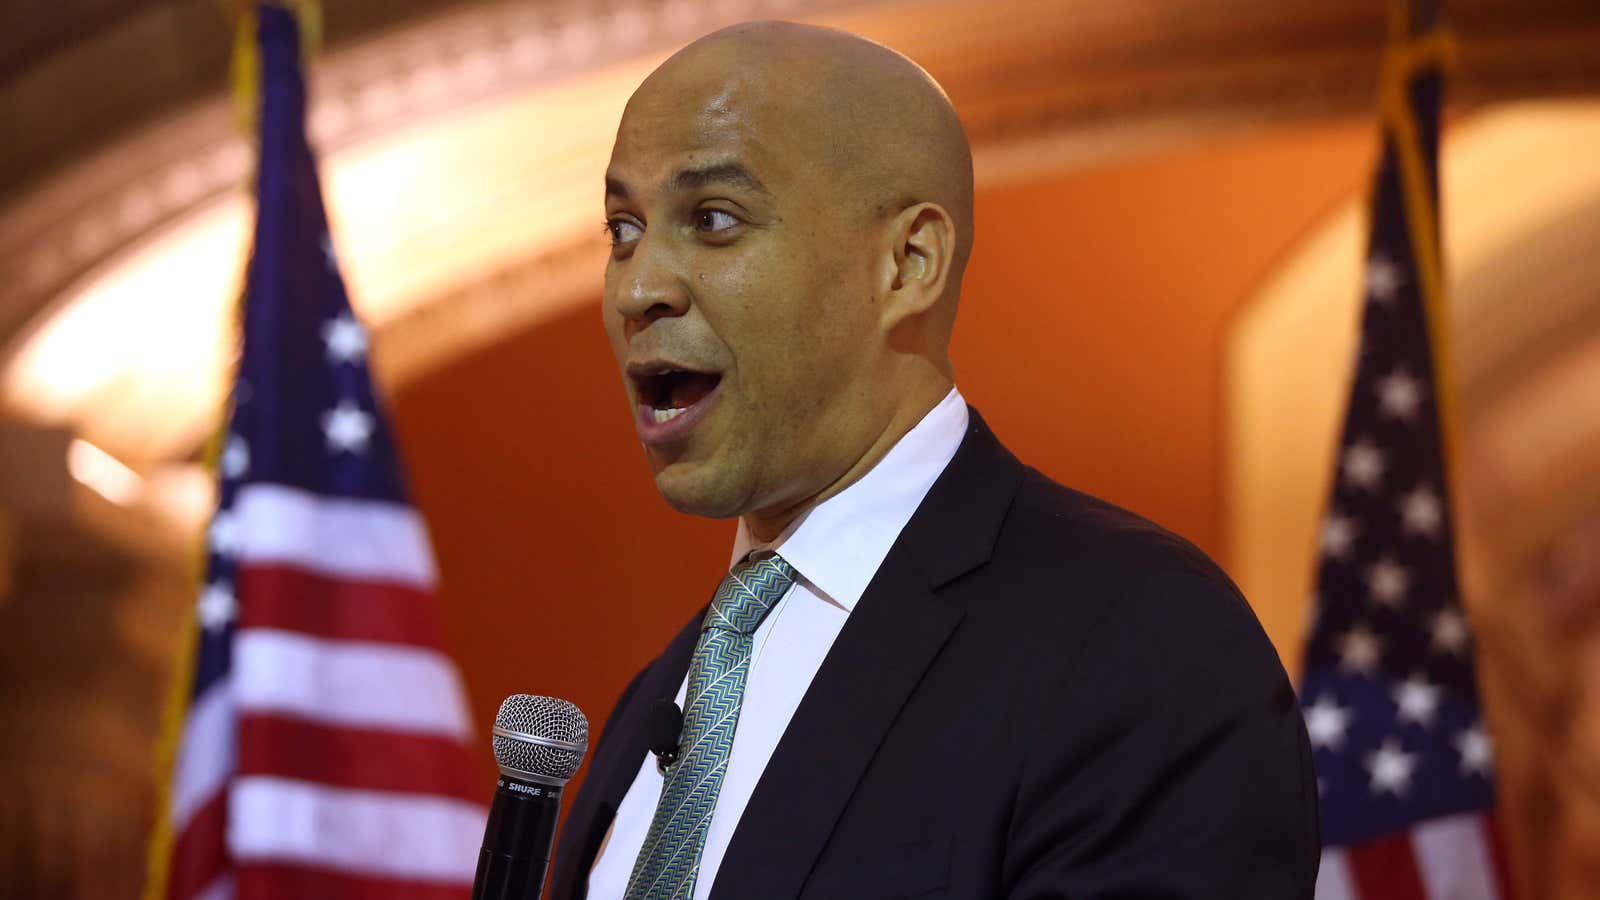 Can Booker shake things up in Washington?